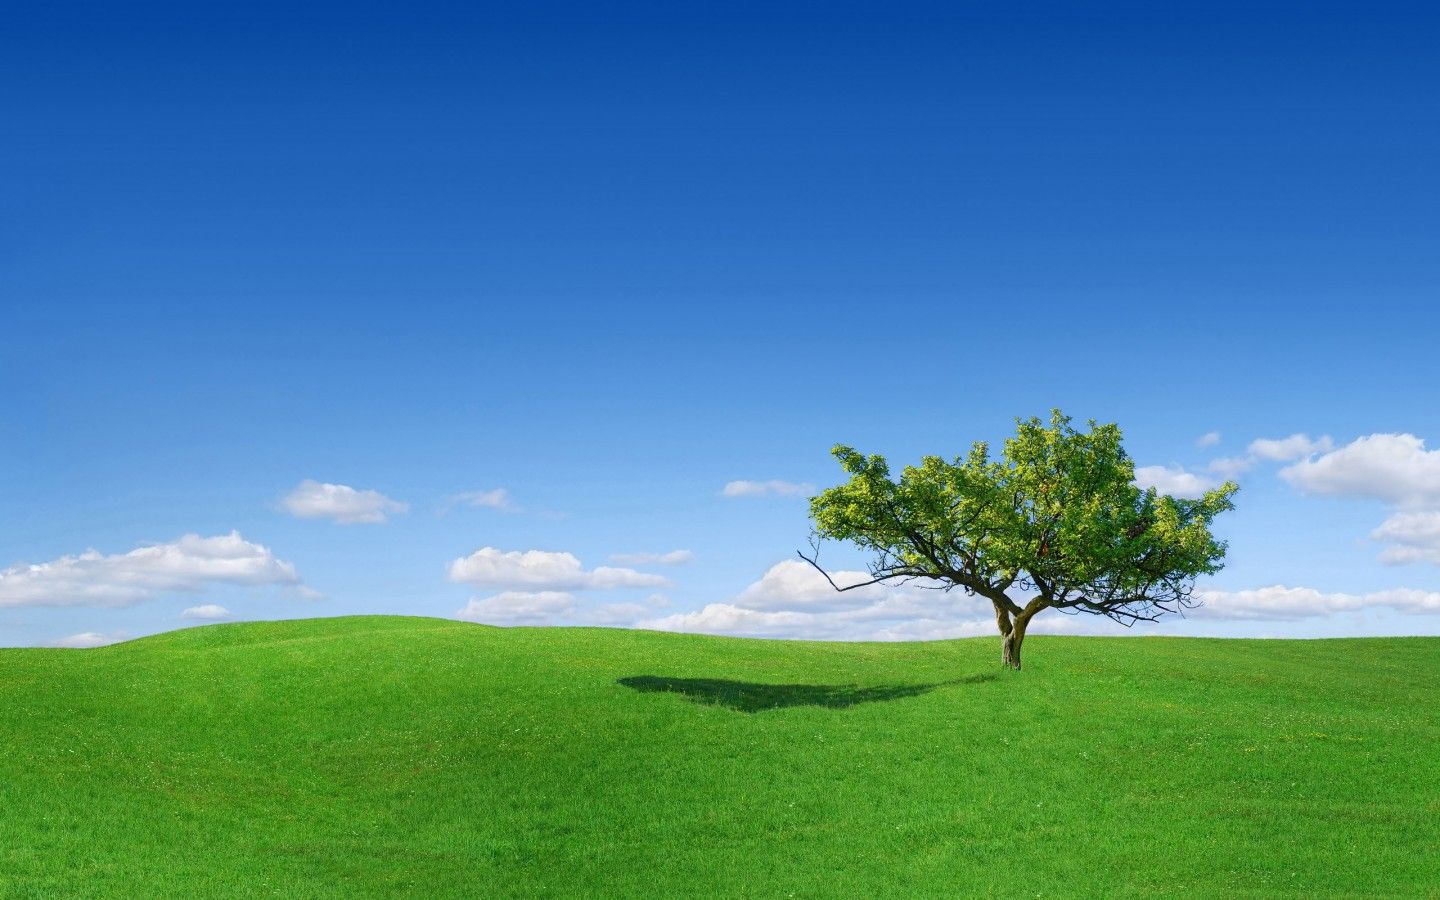 Wallpaper Tree, Alone, Landscape, Green grass, Nature,. Wallpaper for iPhone, Android, Mobile and Desktop